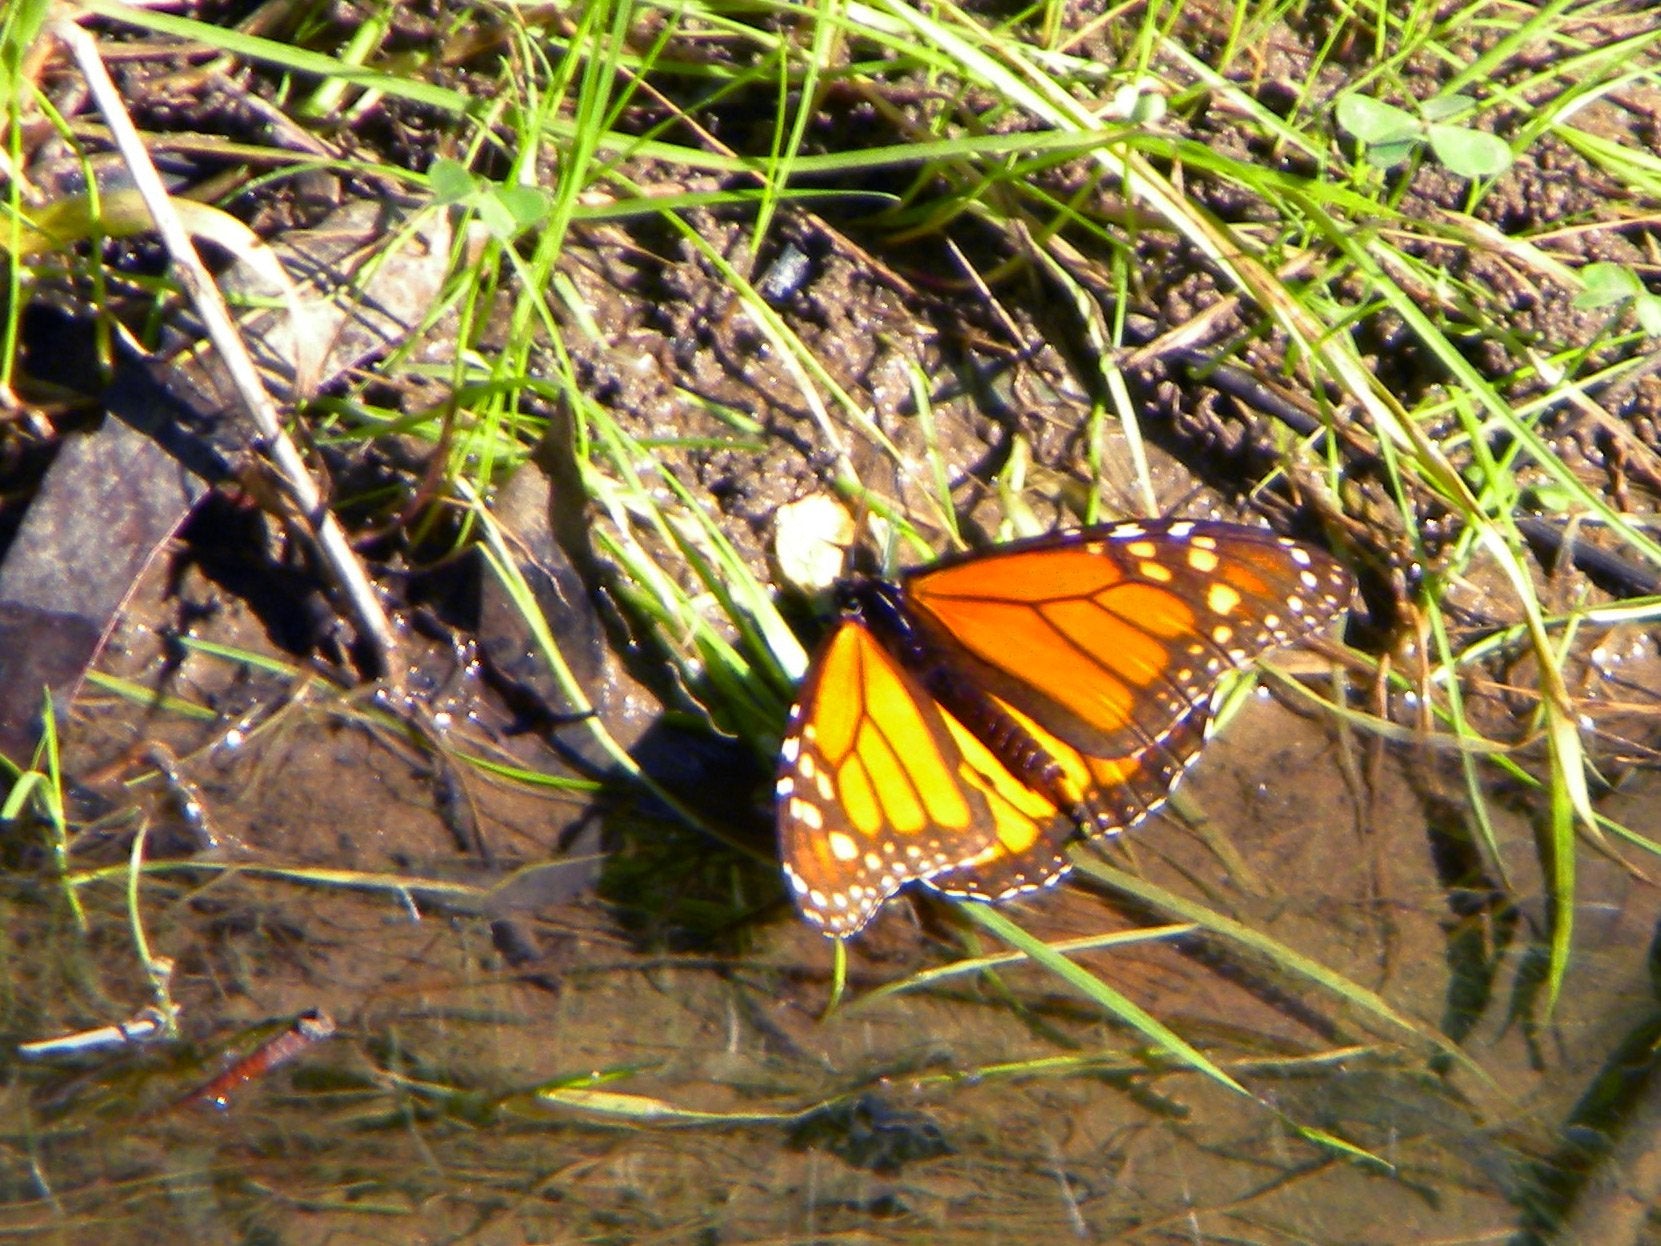 A monarch butterfly, with its iconic orange and black wings, rests near a water's edge during its migration. The image captures a moment of this remarkable journey, reflecting the butterfly's resilience and the delicate beauty it adds to the natural landscape.